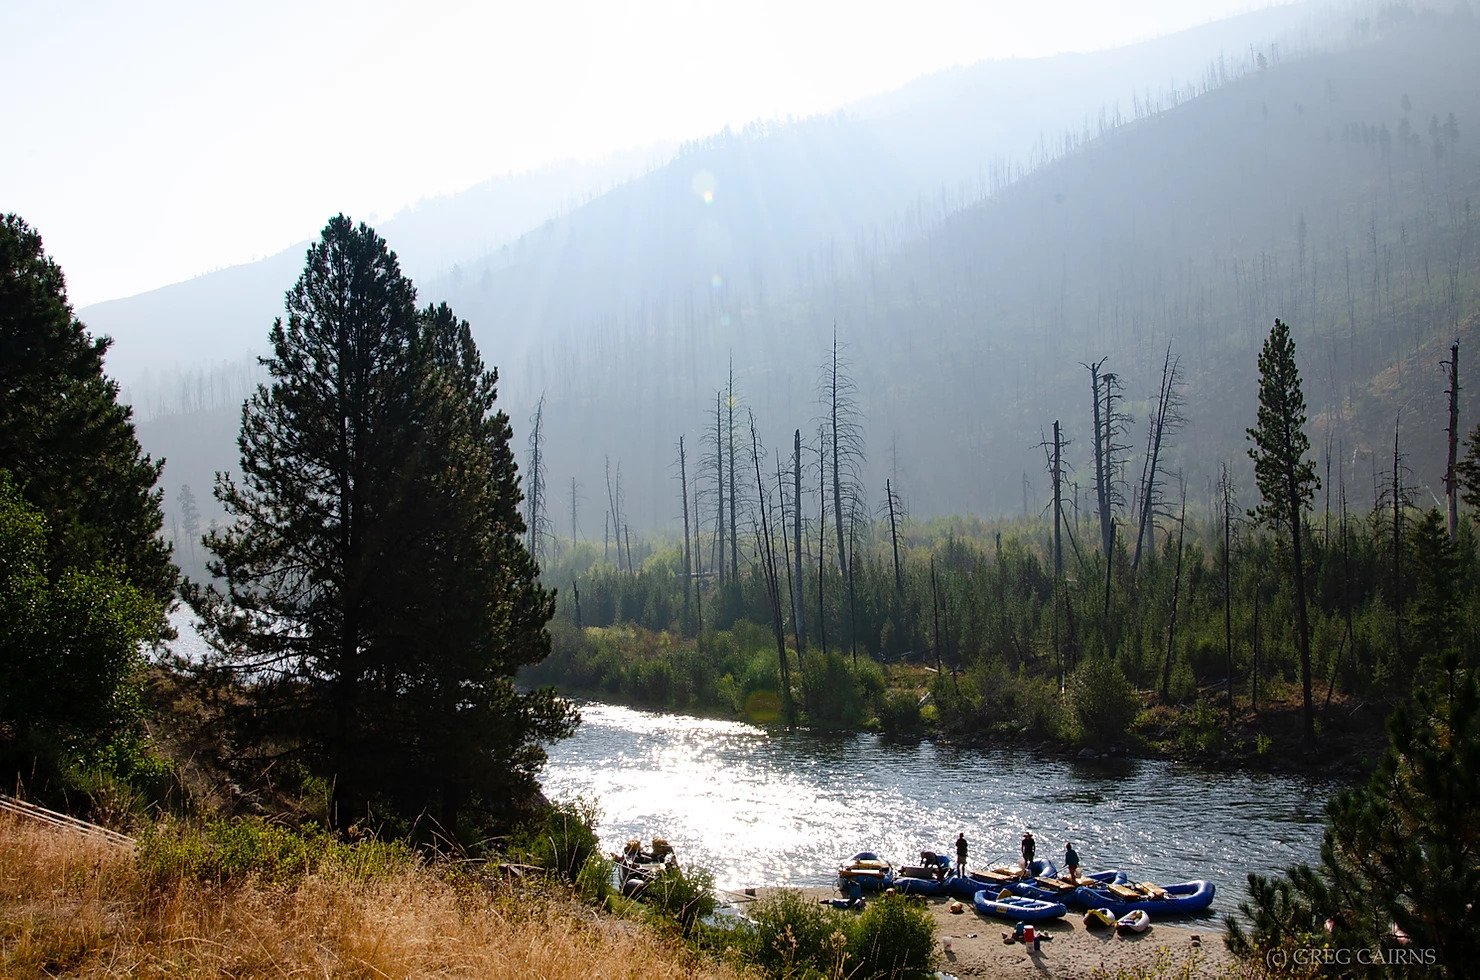 Floating on the Middle Fork of the Salmon River